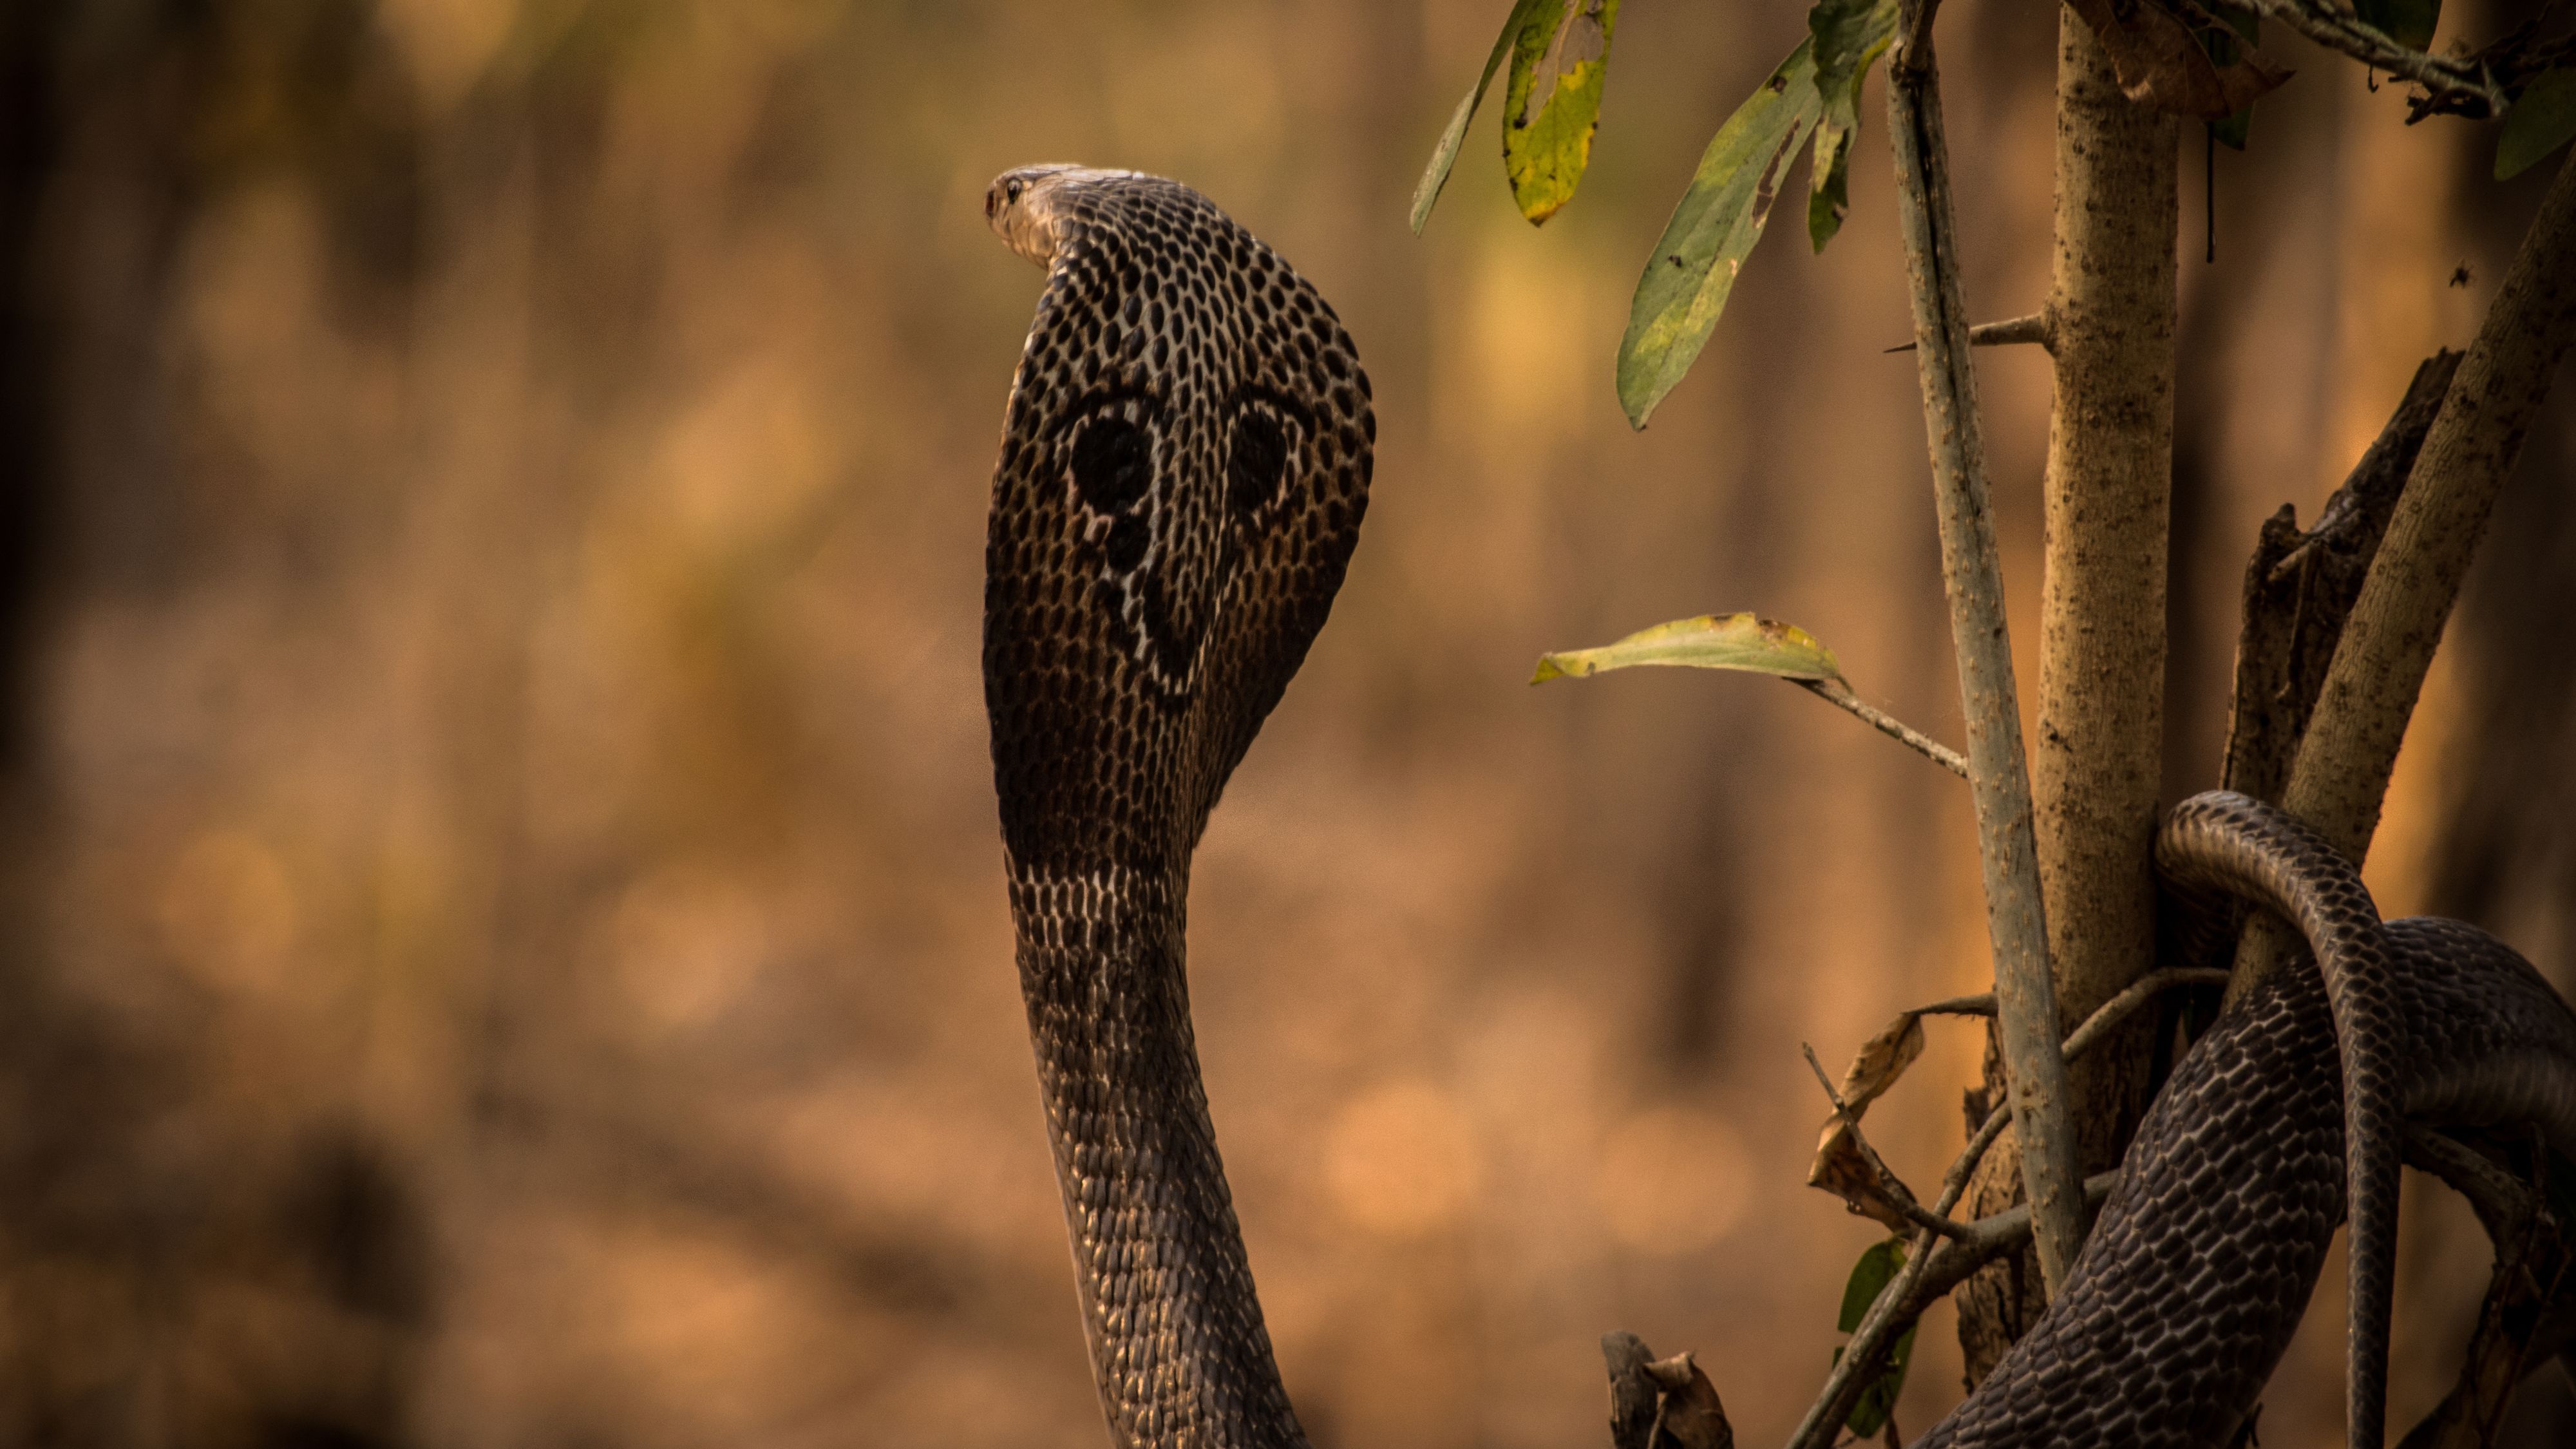 How to survive a cobra bite – or better yet, avoid one entirely